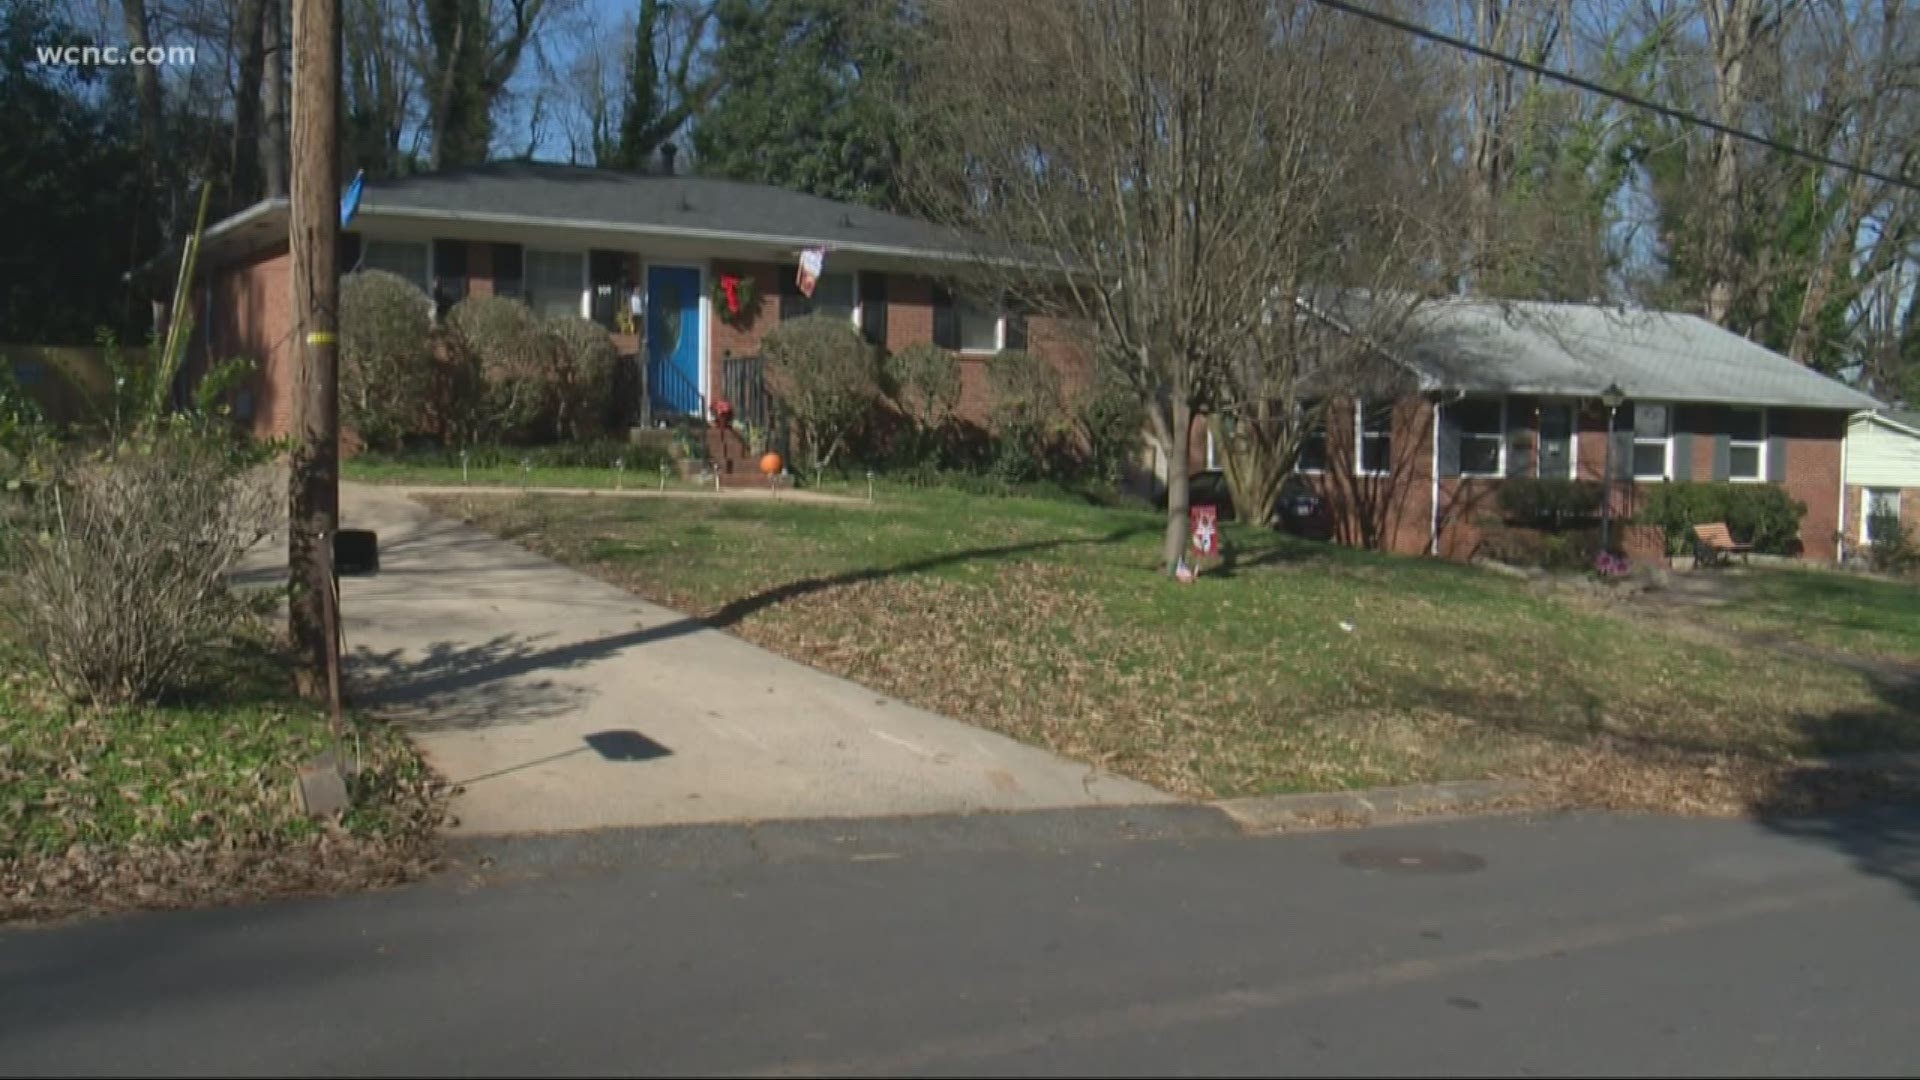 According to a new study by the company, A Secure Life, the Carolinas are among the worst states in the country for home break-ins.